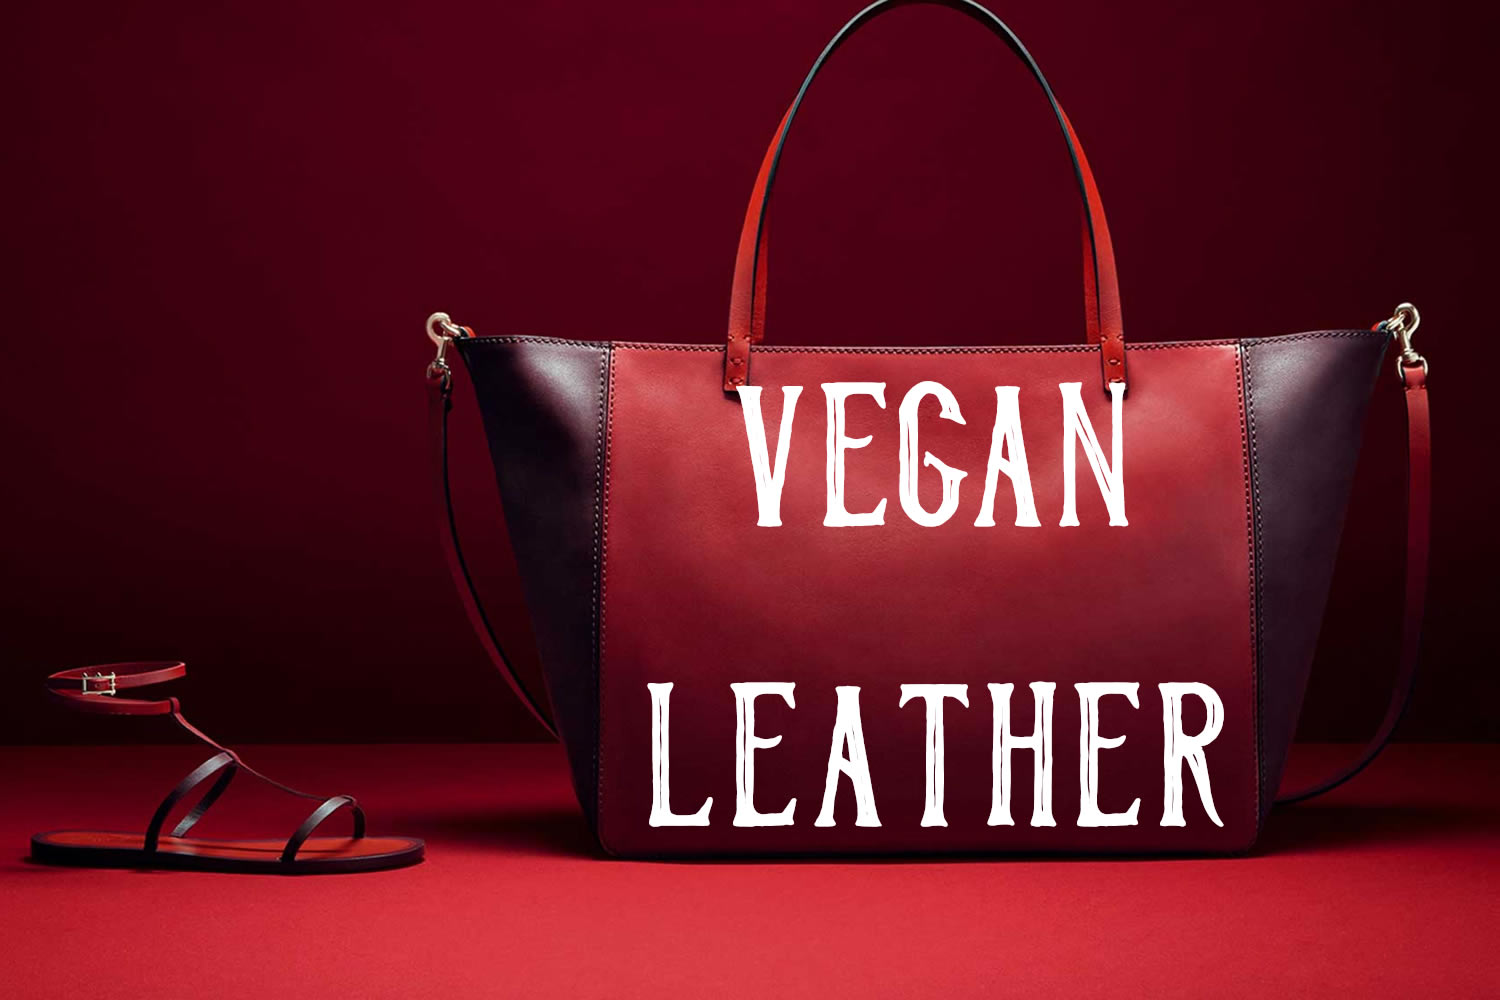 Is Vegan Leather Really Any Better?